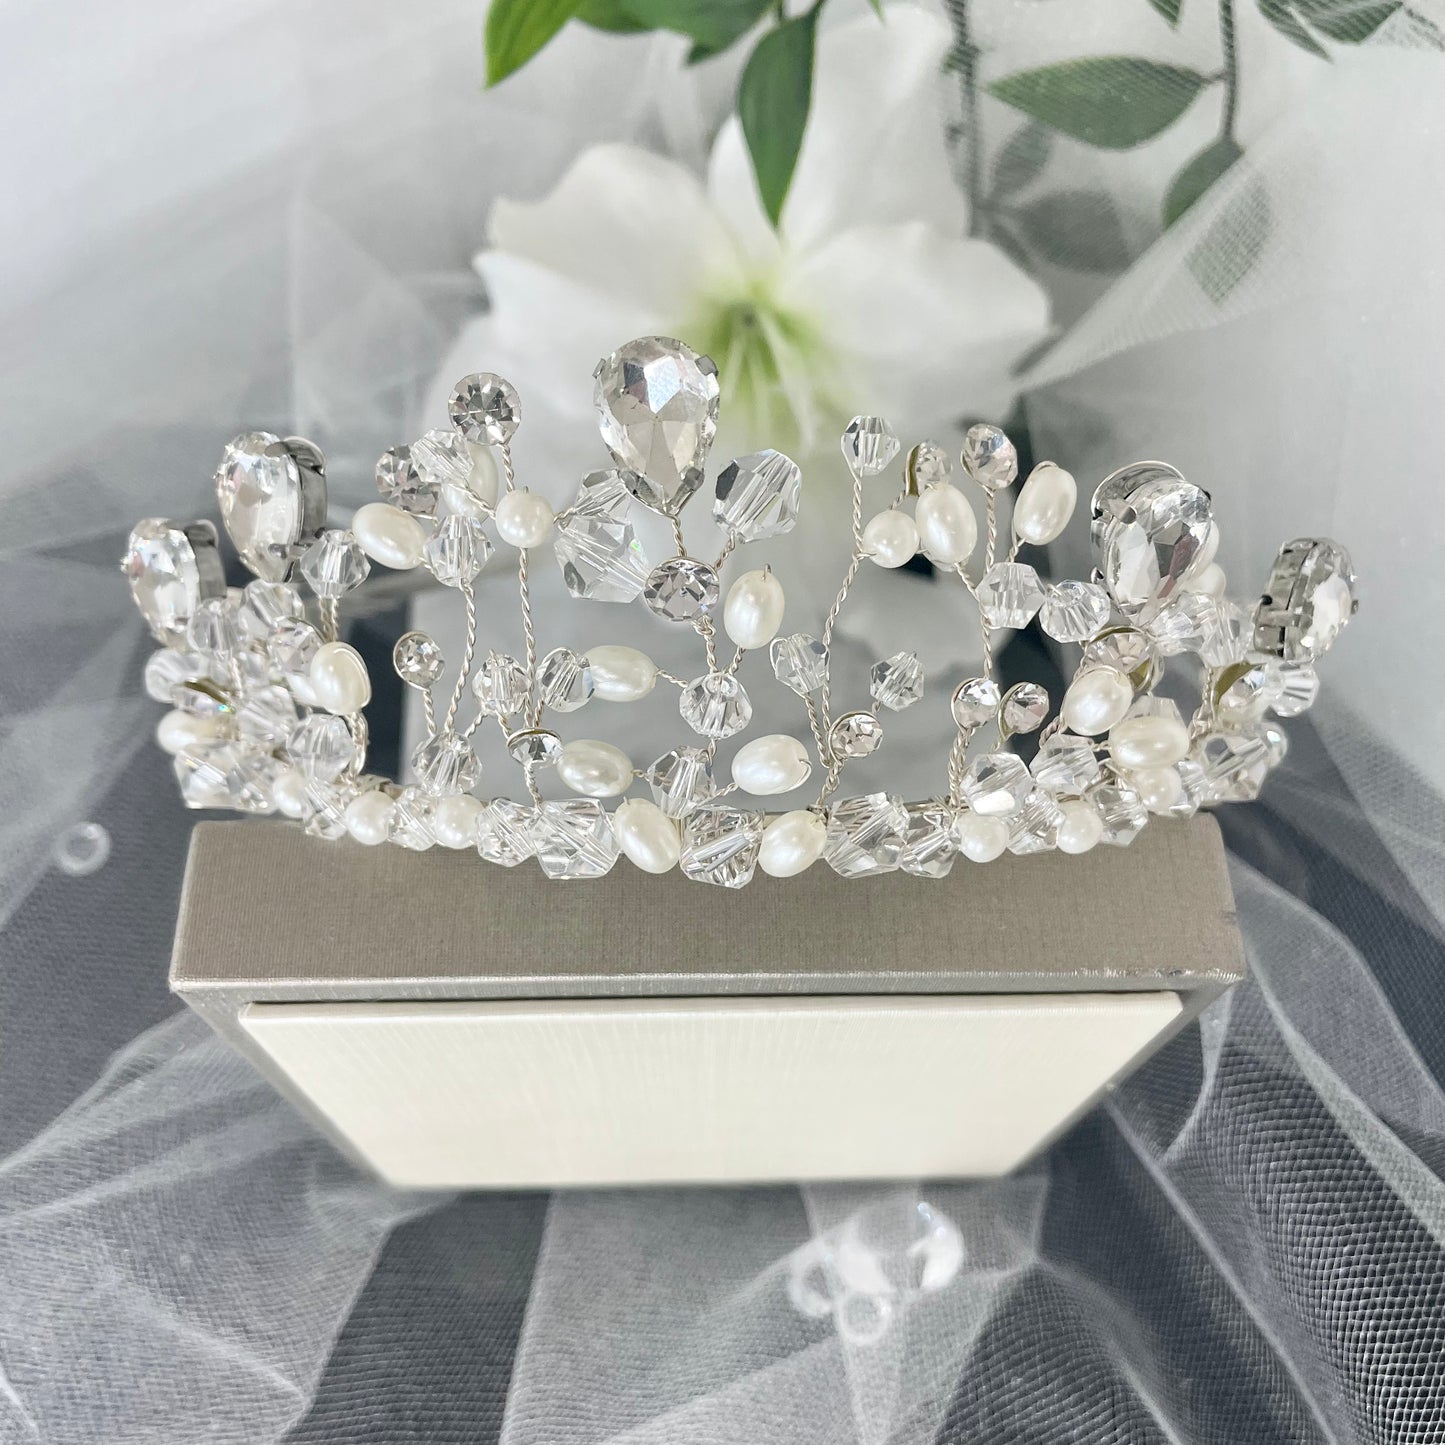 Amara Tiara: Exquisite Handcrafted Crystal and Pearl Adorned Masterpiece.